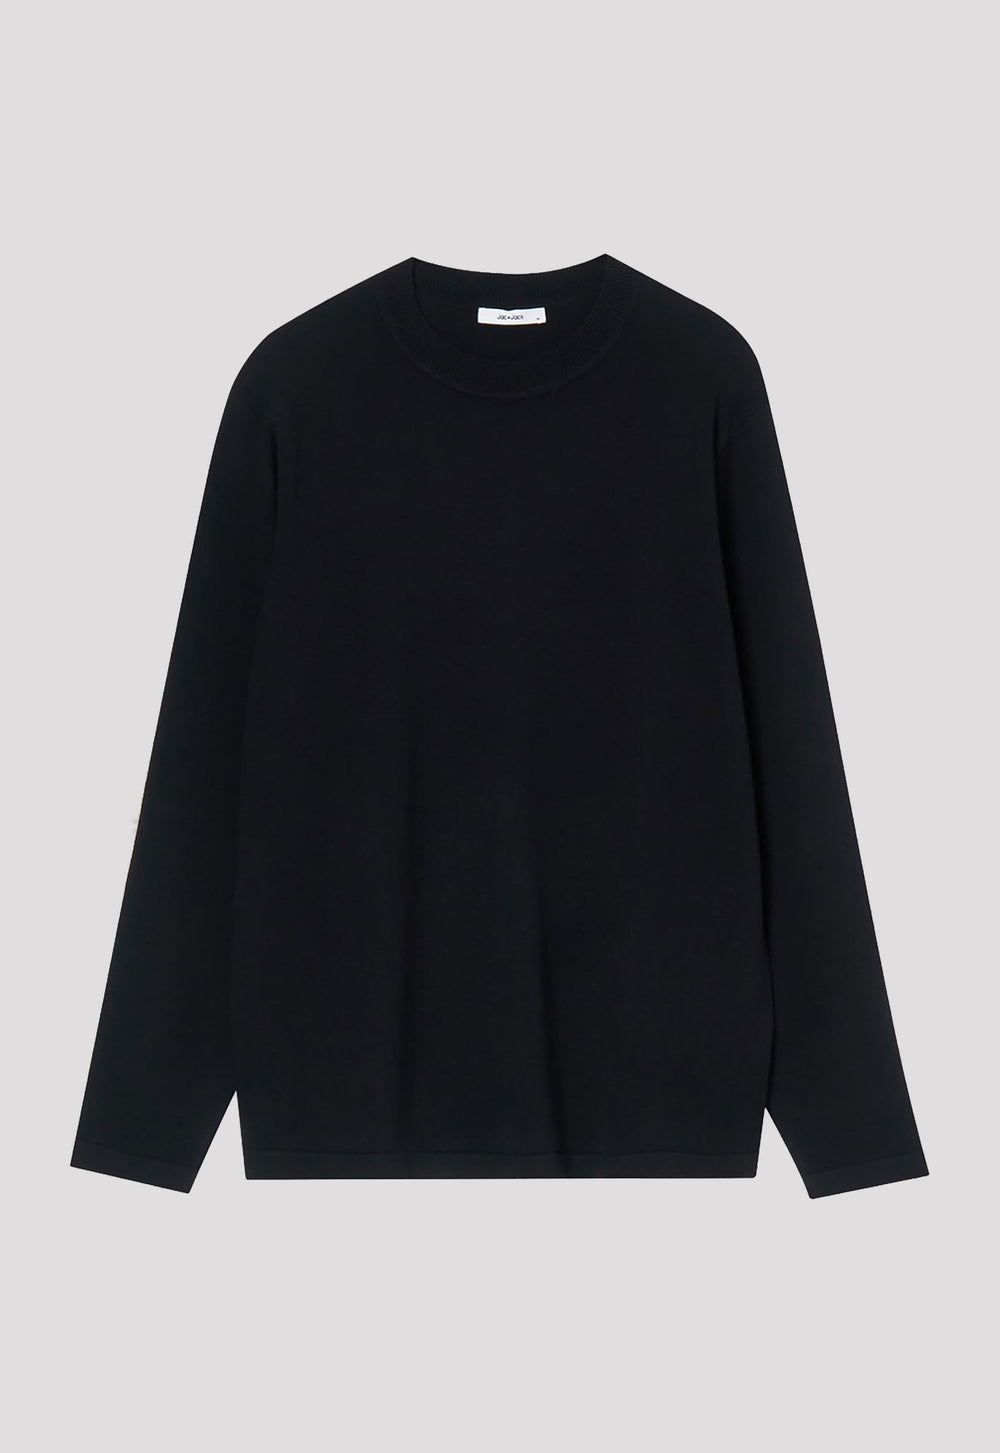 Jac+Jack AUGUST COTTON CASHMERE SWEATER in Black